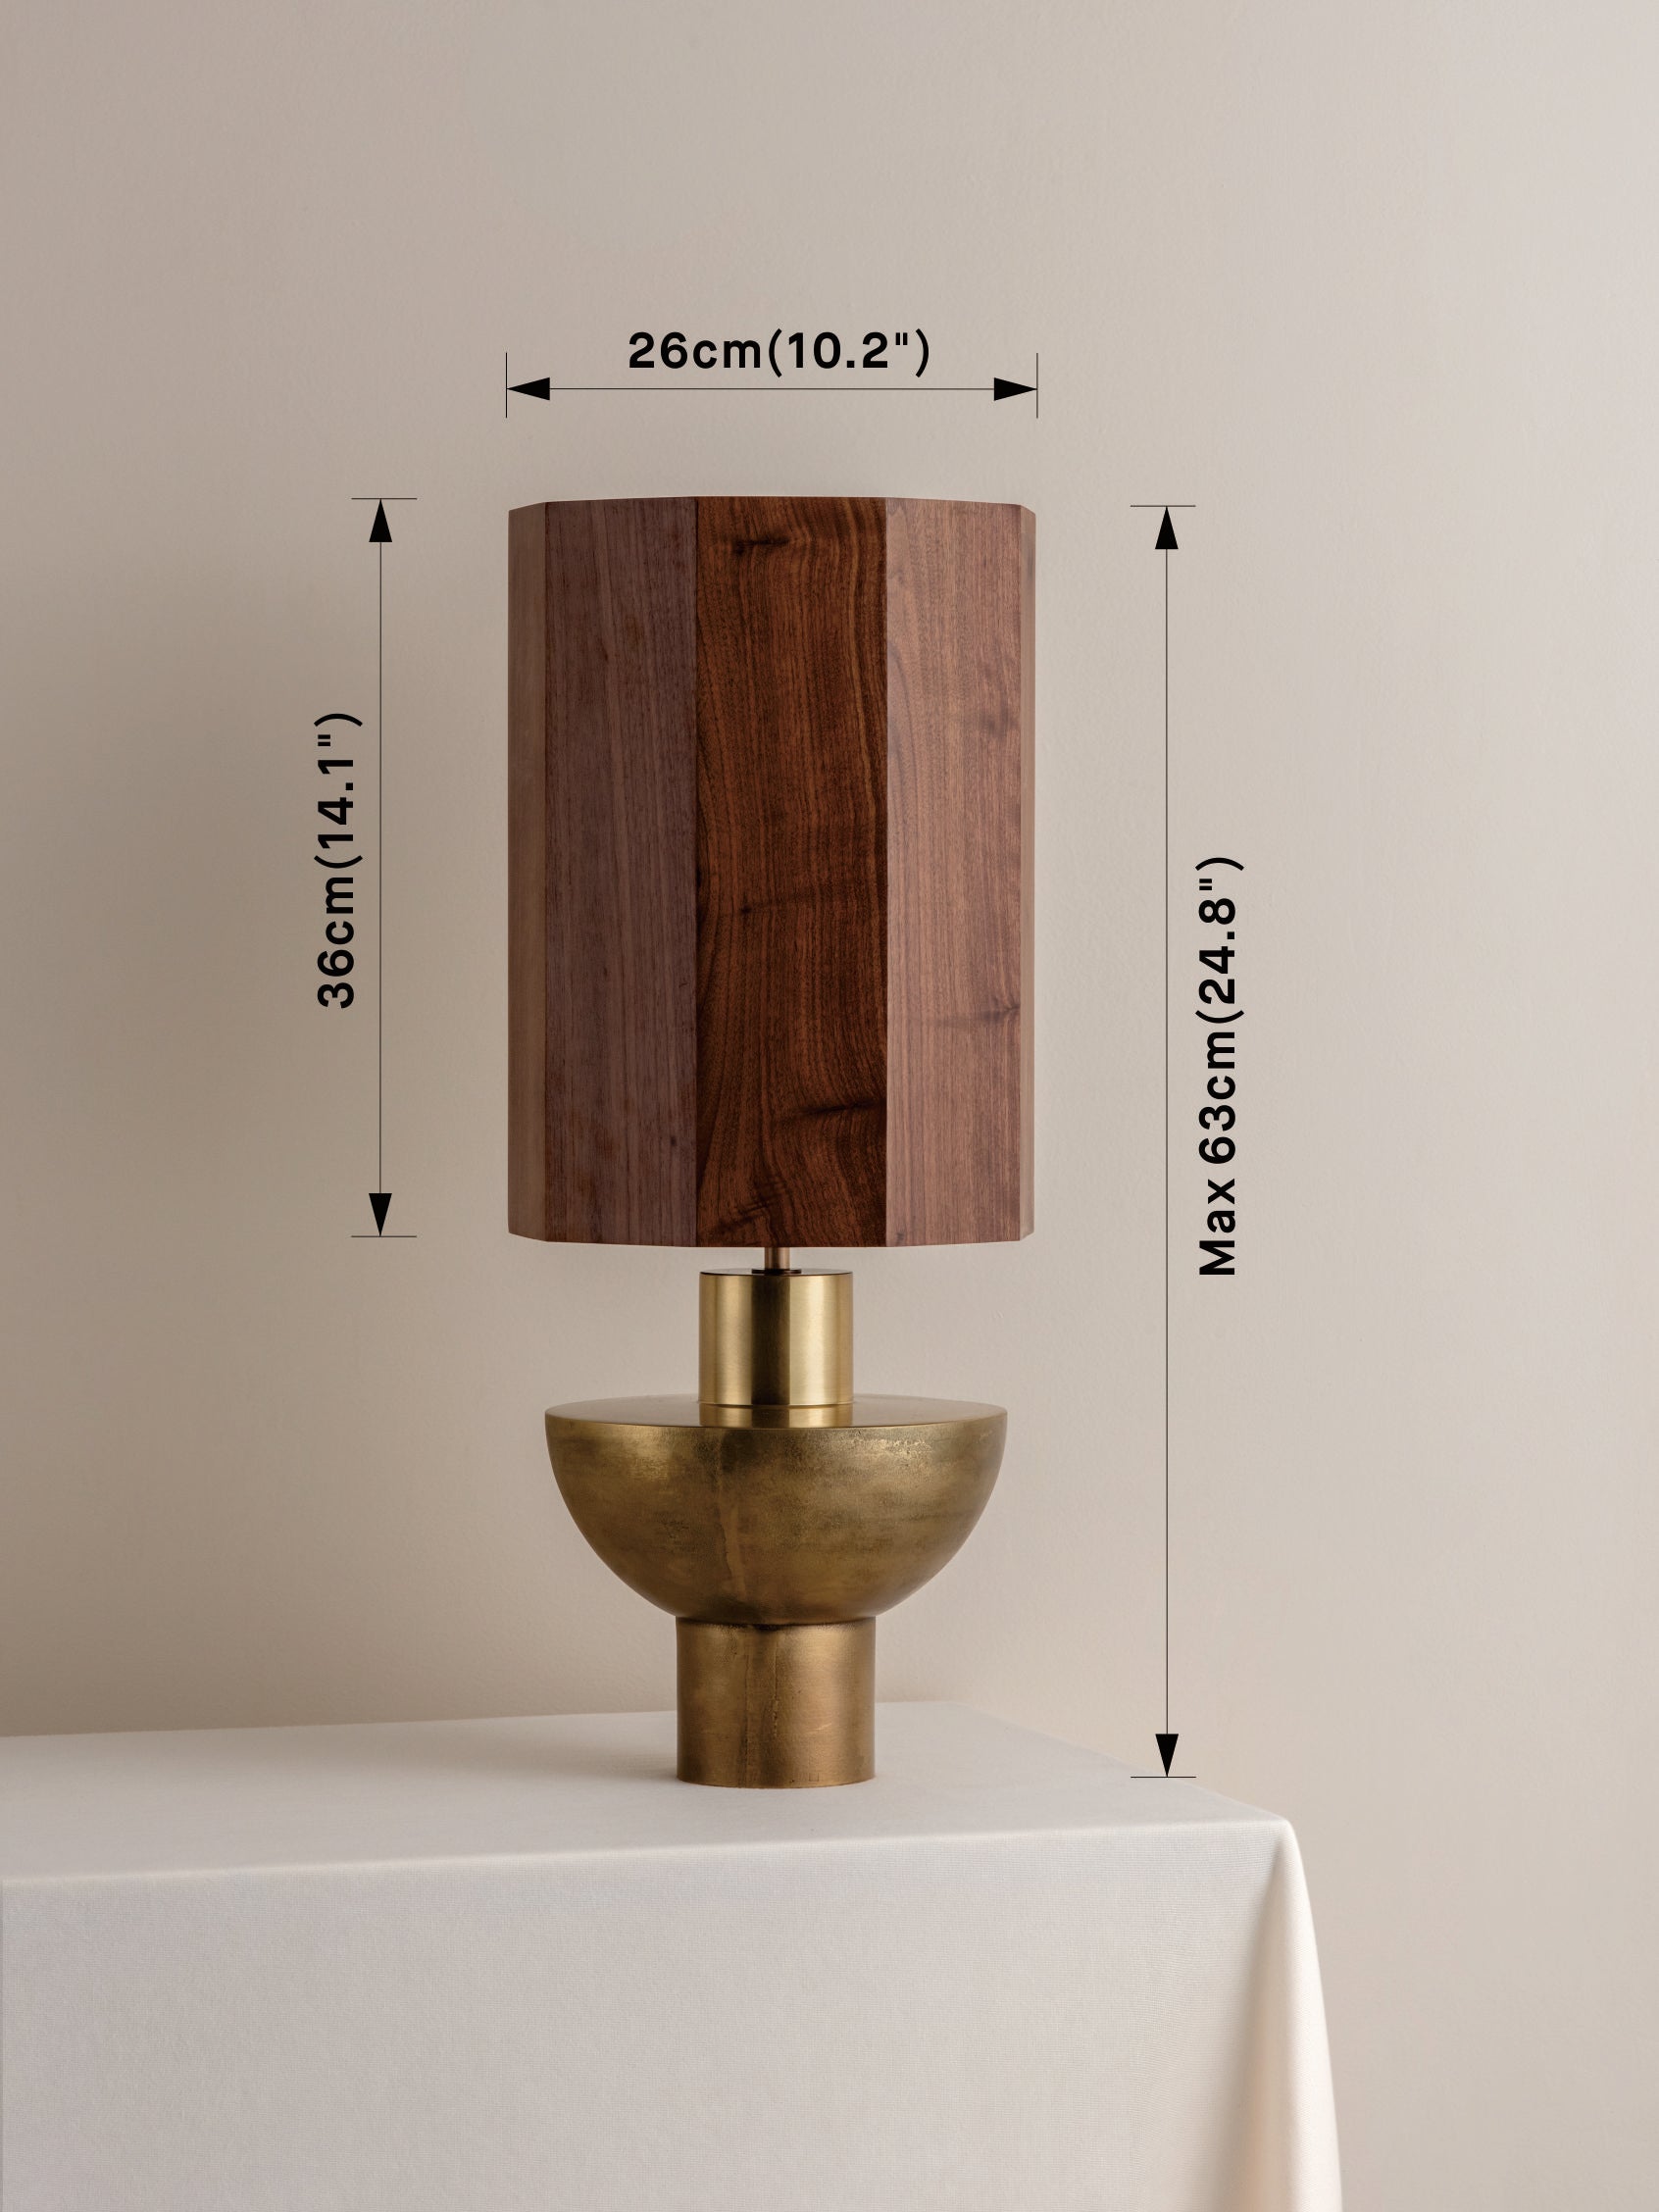 Editions brass lamp with + walnut wood shade | Table Lamp | Lights & Lamps Inc | Modern Affordable Designer Lighting | USA